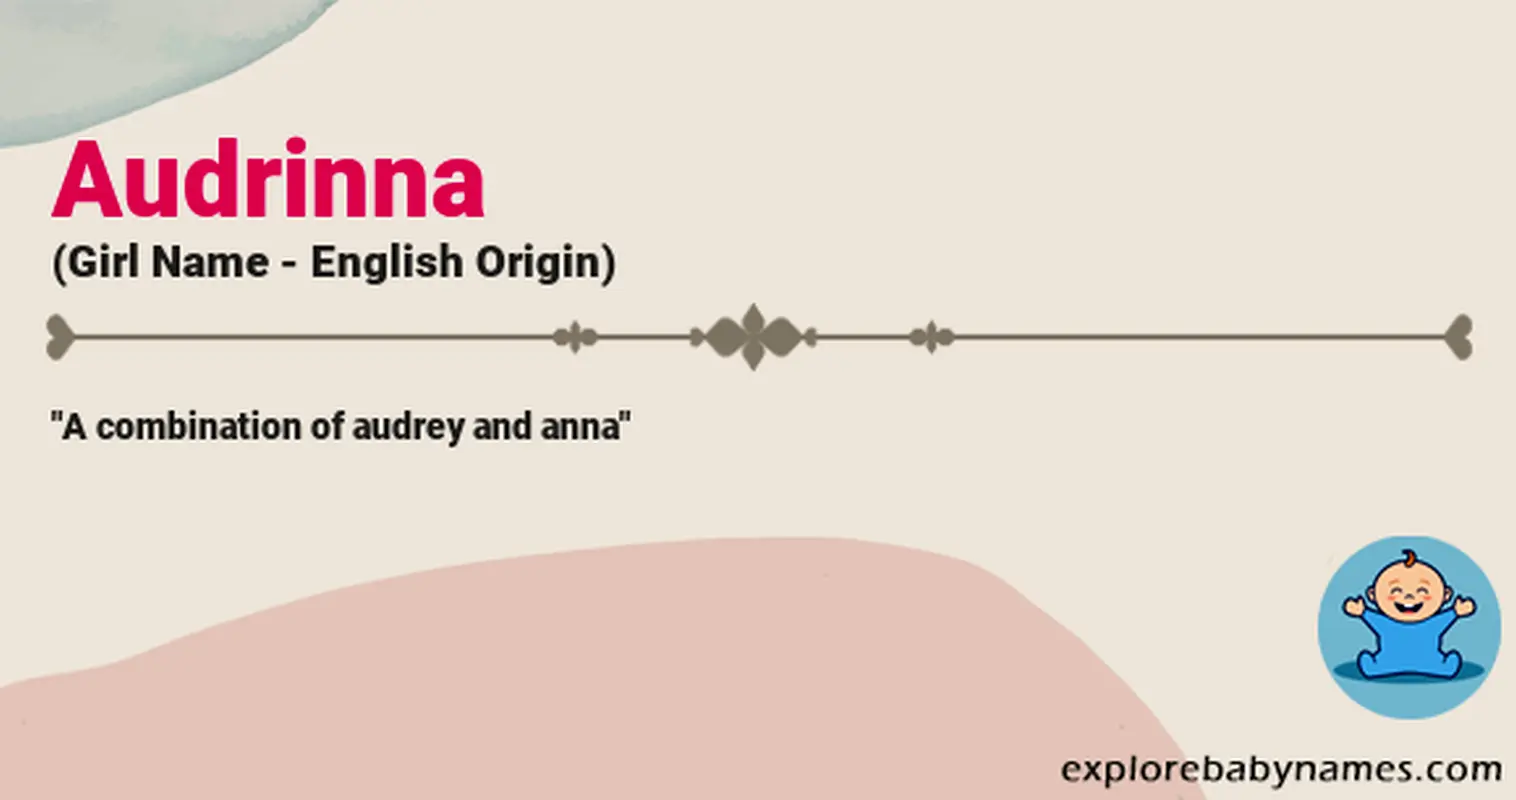 Meaning of Audrinna